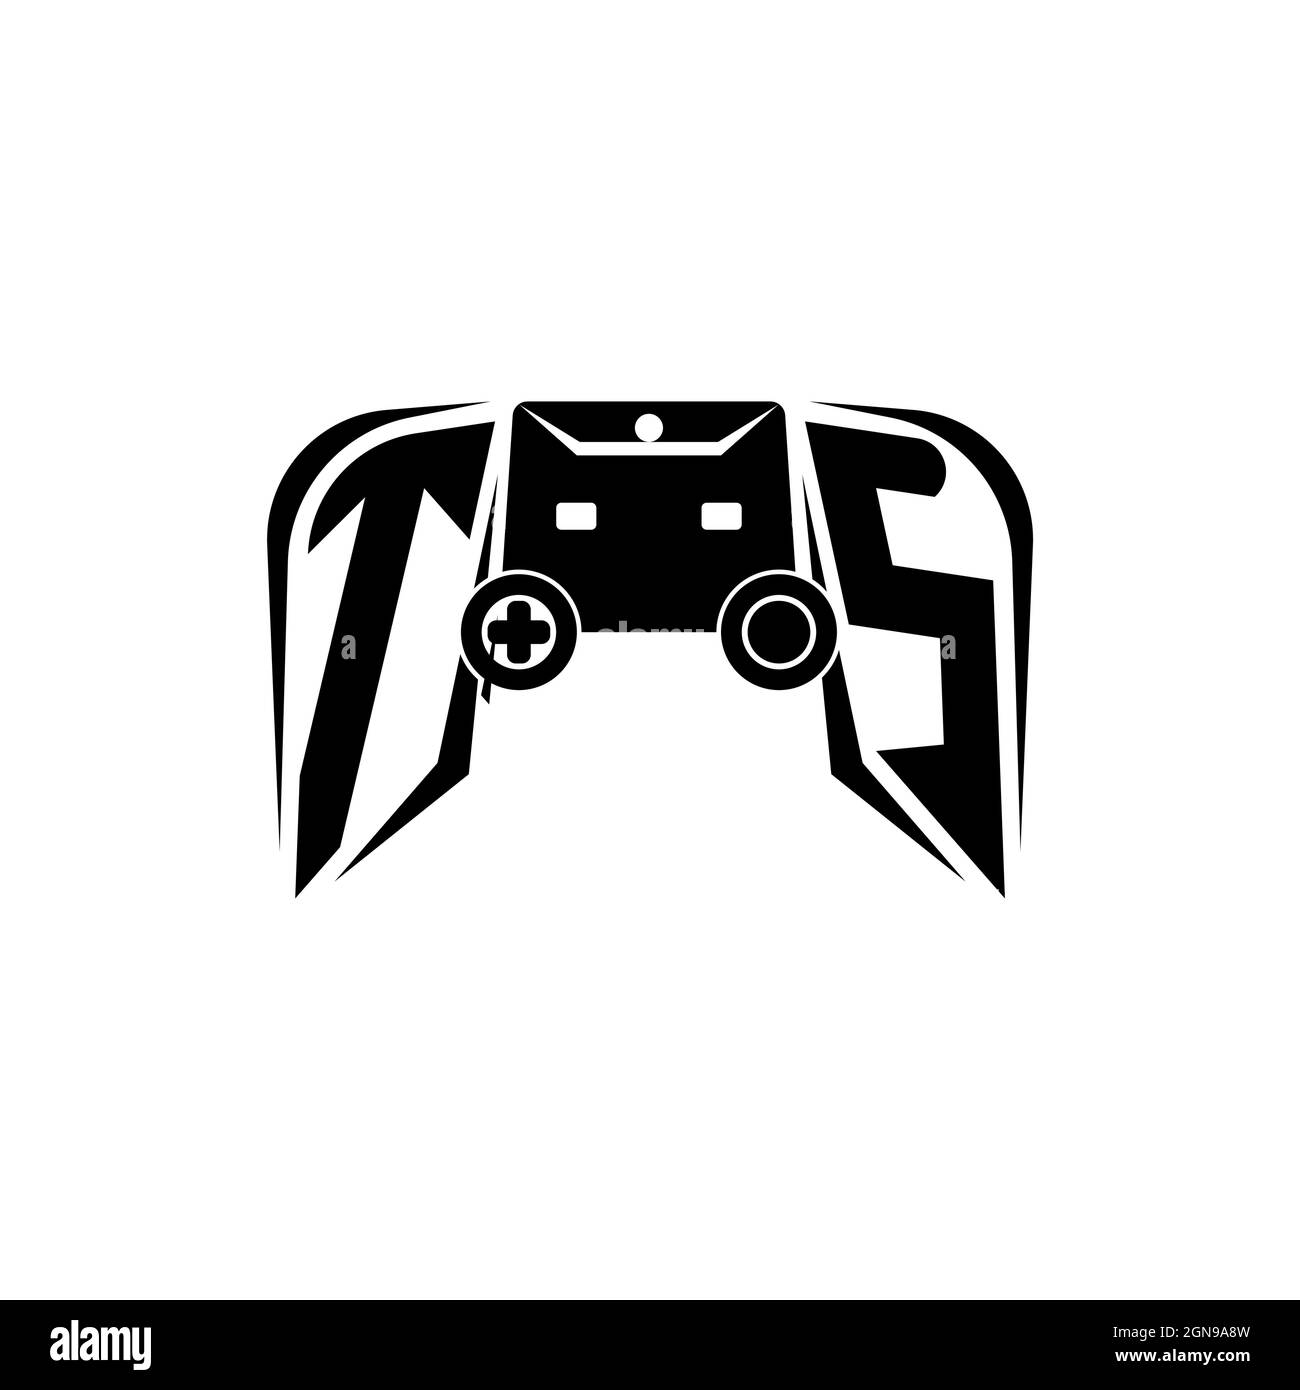 TS Initial ESport gaming logo. Game console shape style vector template Stock Vector